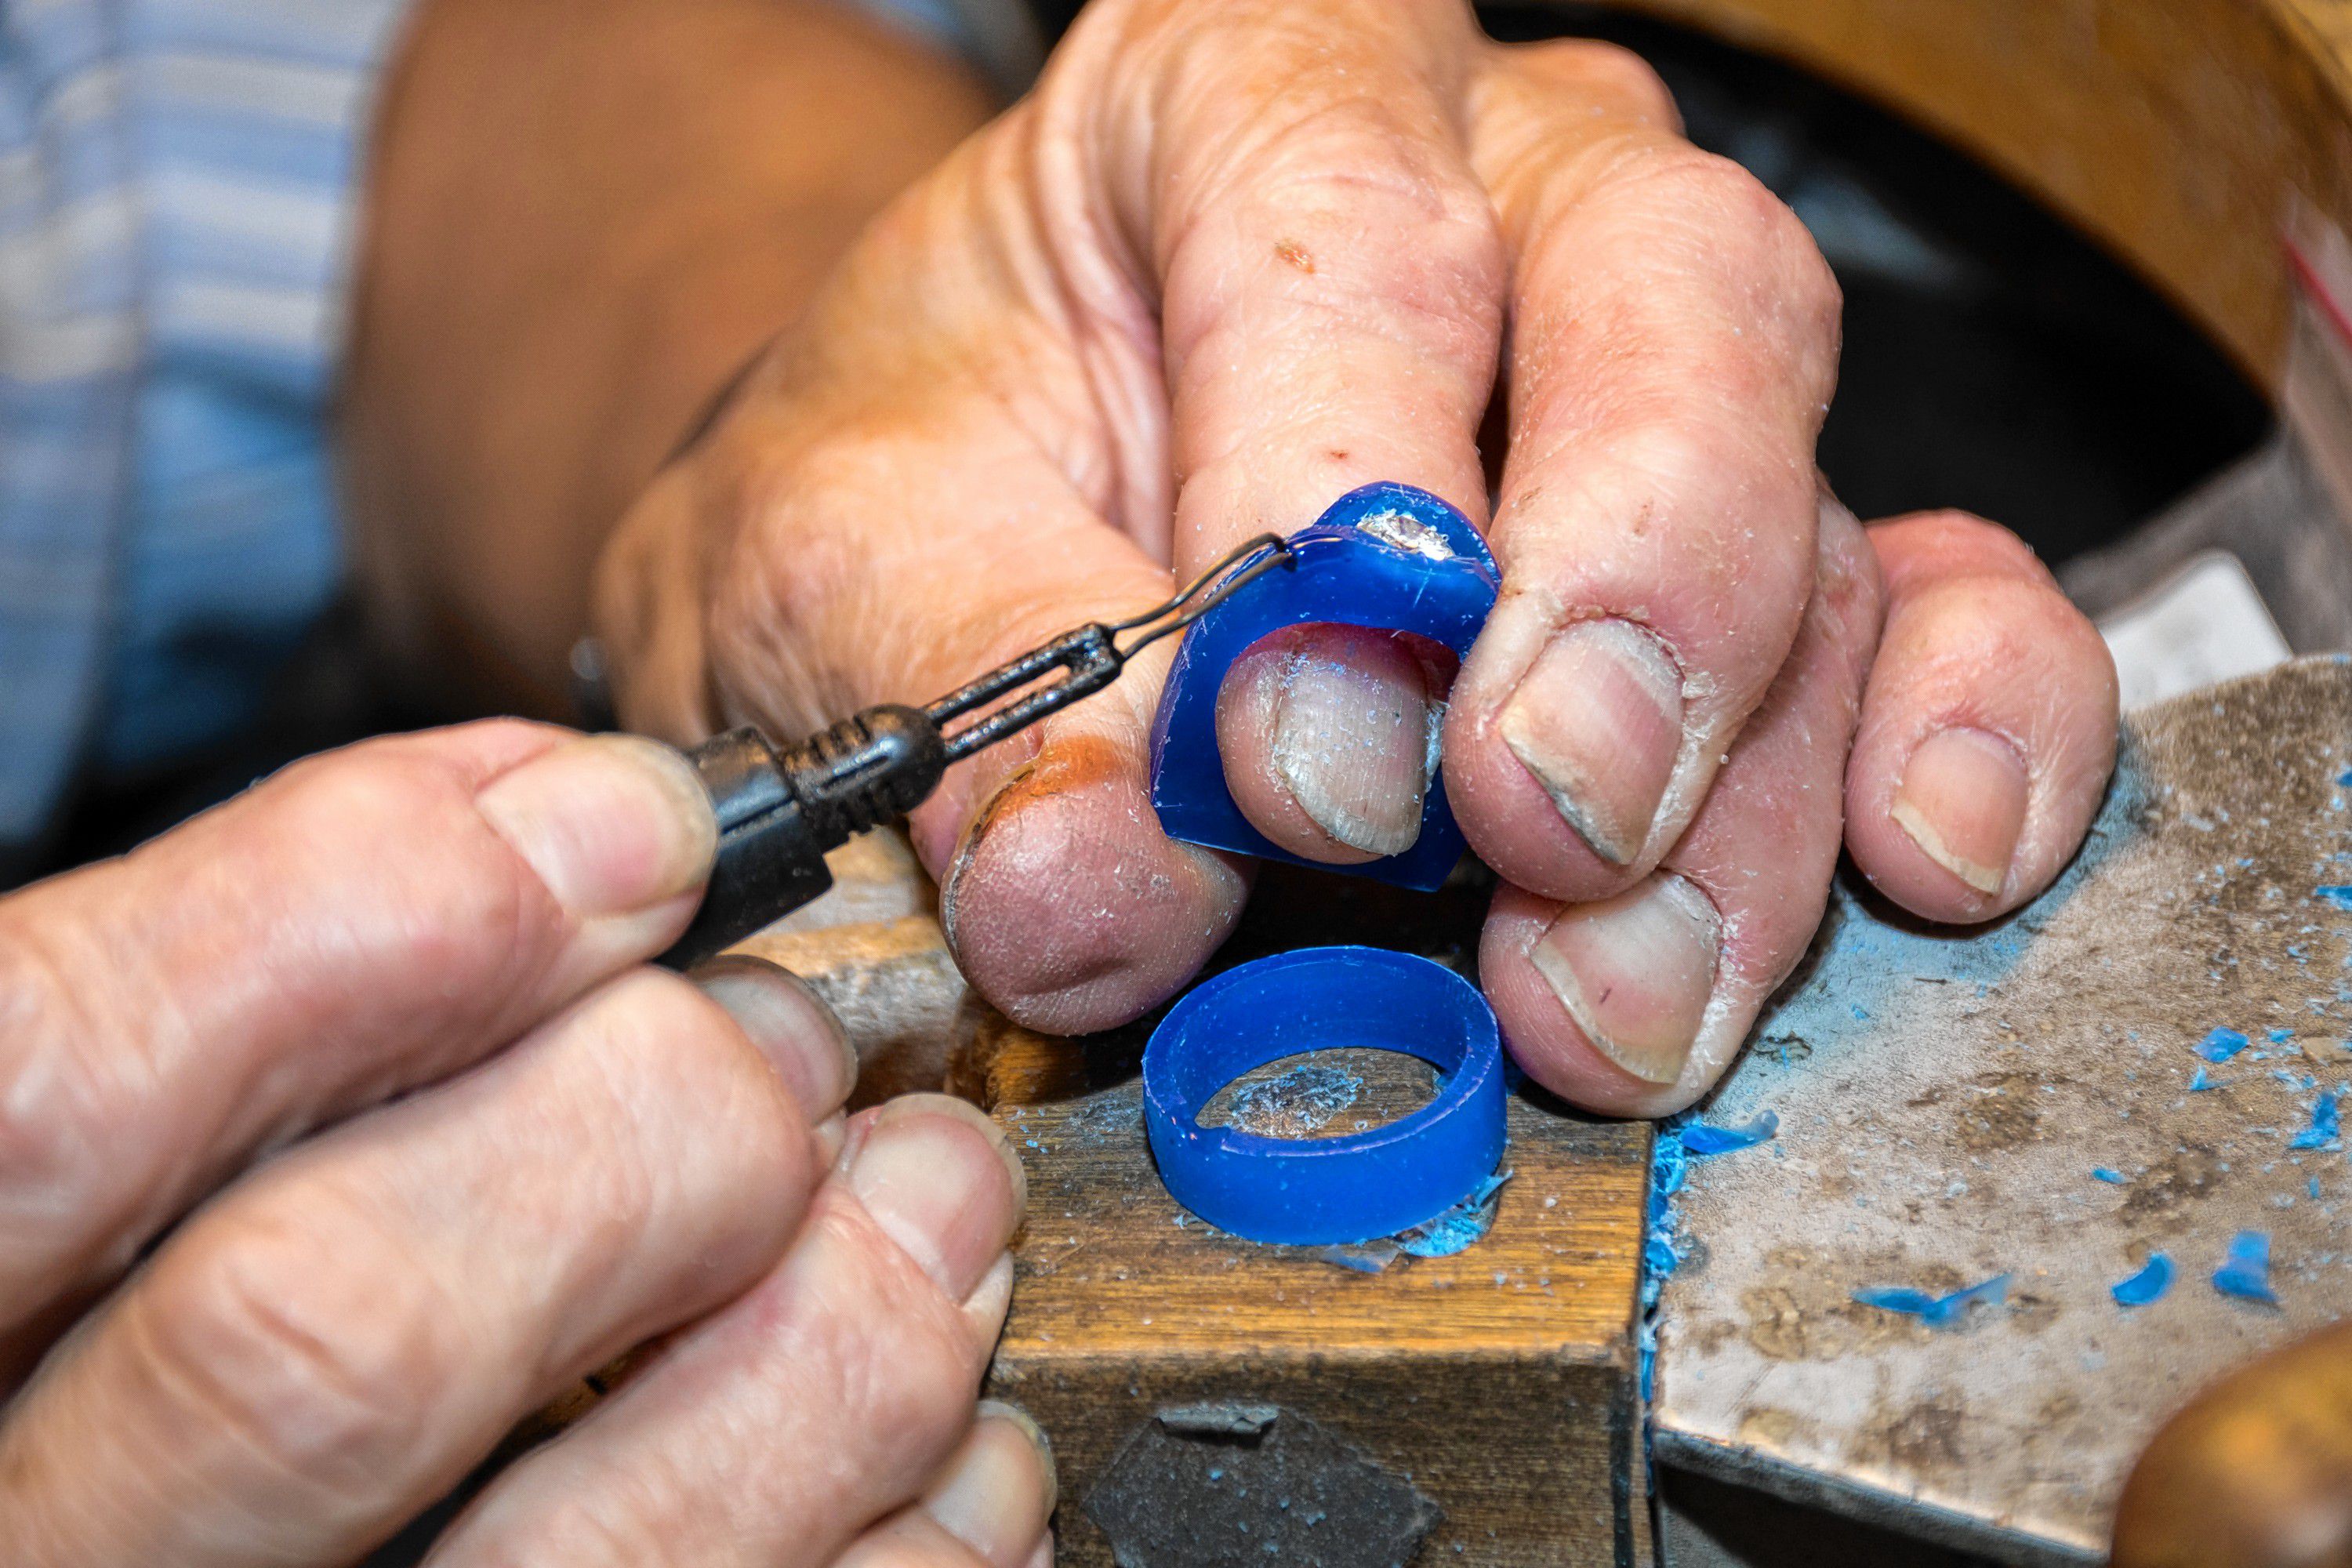 Paul Gross, of Designer Gold in Hanover, N.H., carves wax to create a custom band for a stone being reset for a customer. The wax will eventually be replaced with gold. "I'm old school. Some jewelers have moved to 3-D, not me" said Gross, who has been designing handcrafted jewelry since 1977. (Nancy Nutile-McMenemy photograph)